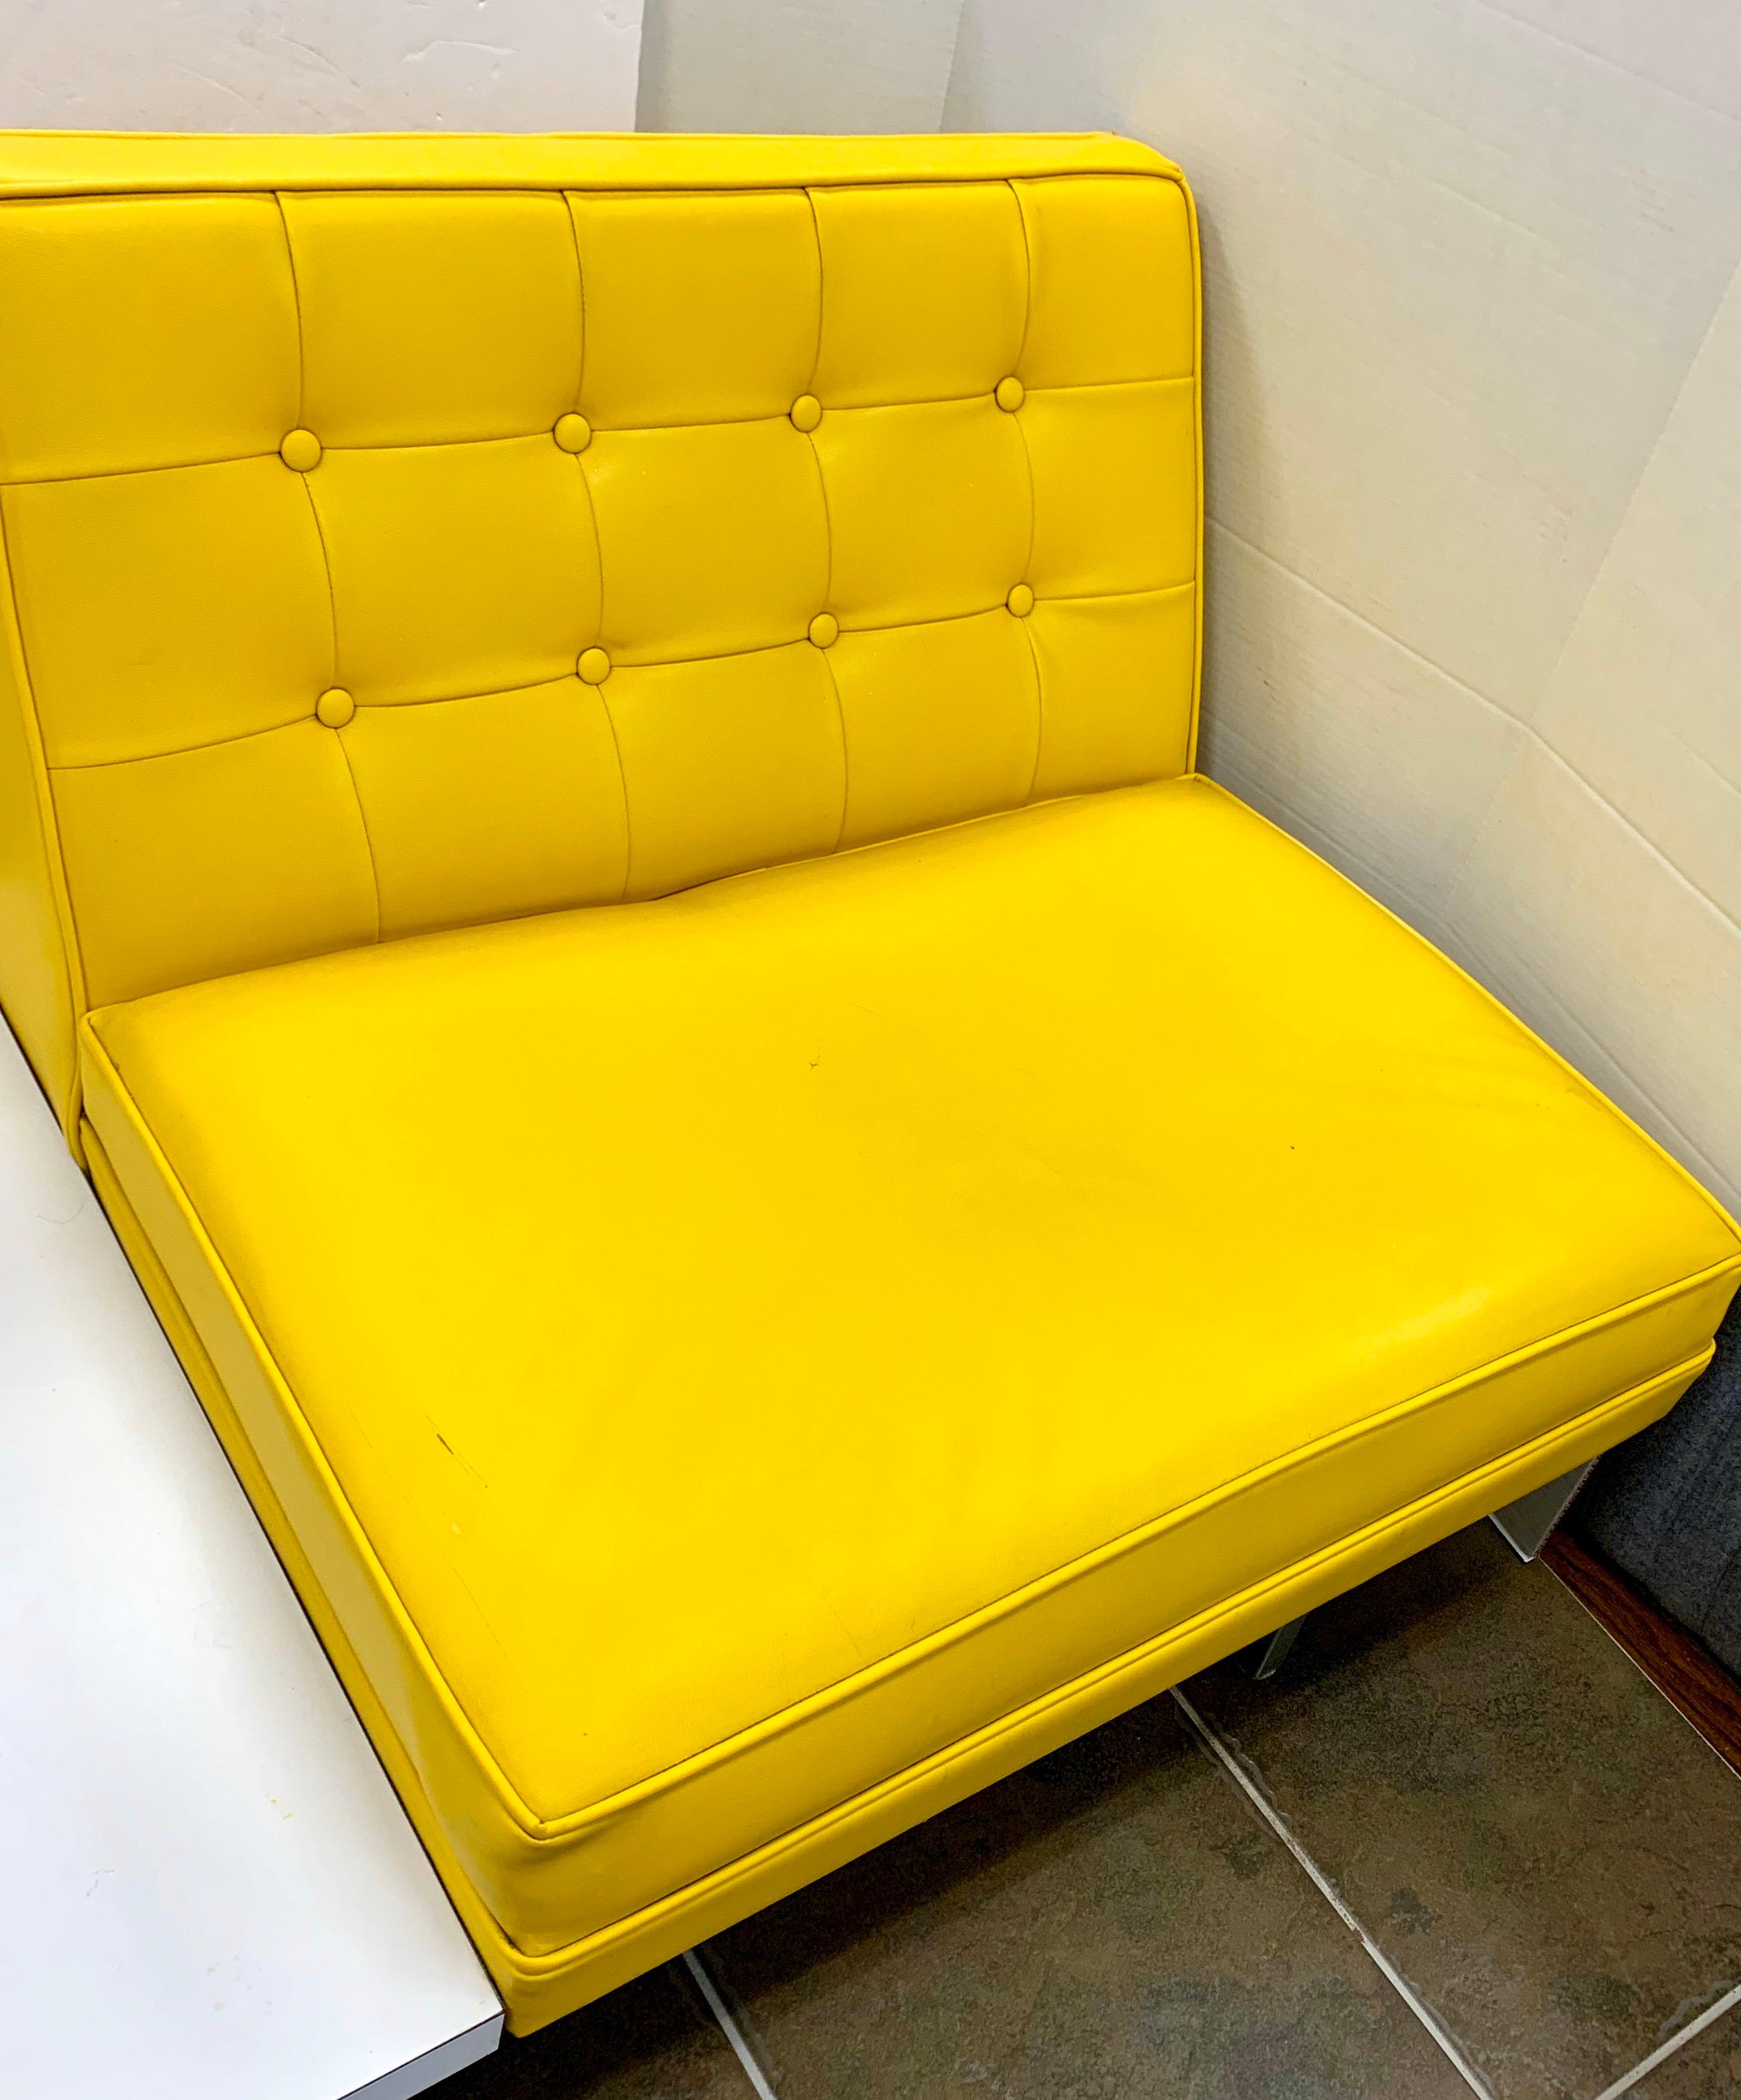 Elegant and iconic midcentury signed living room loveseat designed by George Nelson for Herman Miller. It features original banana yellow vinyl upholstery which is ultra rare and coveted.
The frame is made of chrome steel. The seat has an attached